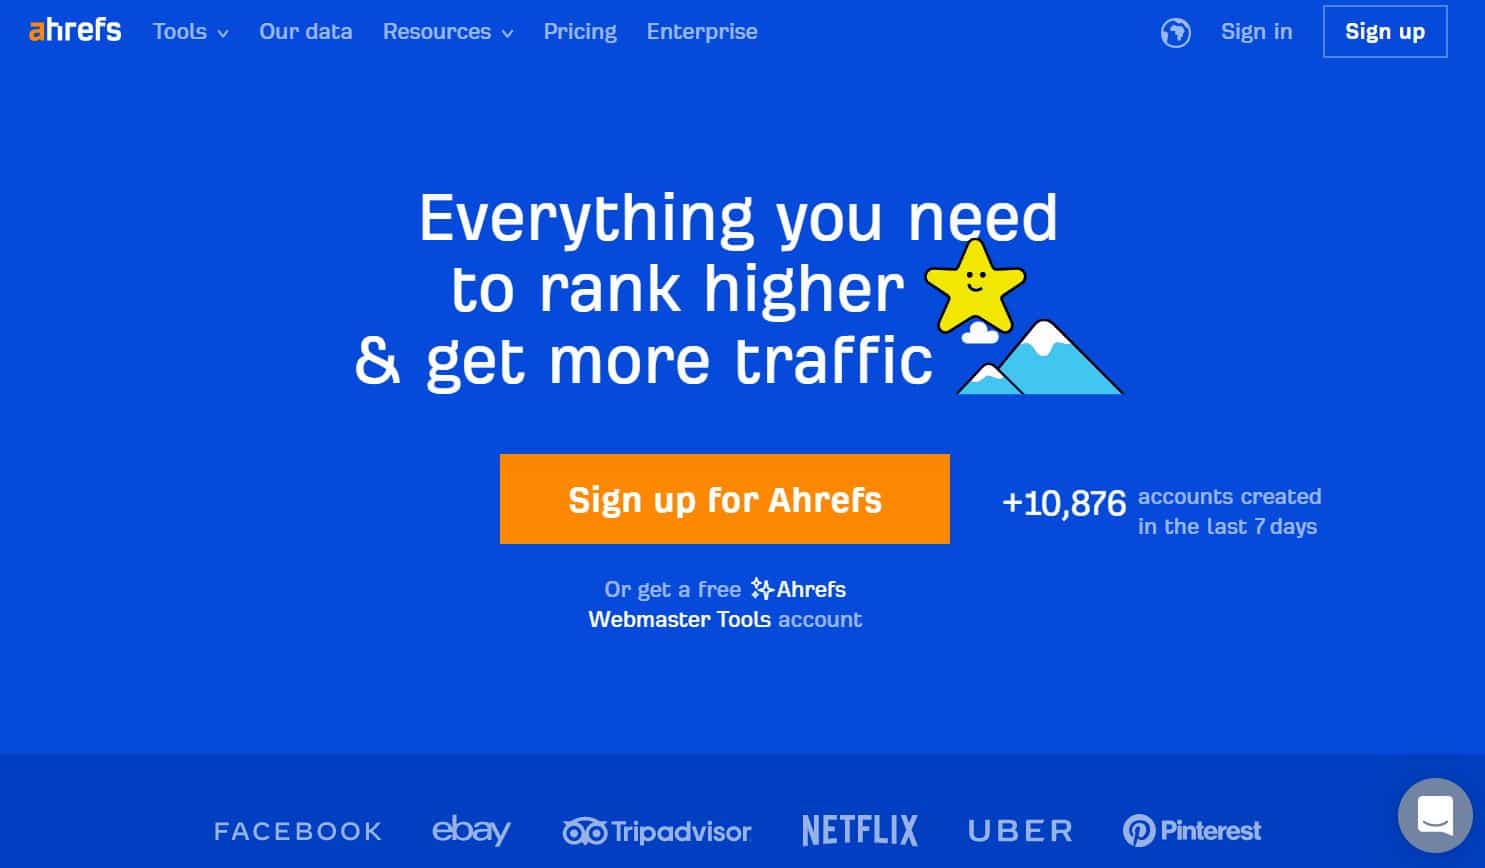 Die Ahrefs-Homepage mit dem Slogan "Everything you need to rank higher & get more traffic".